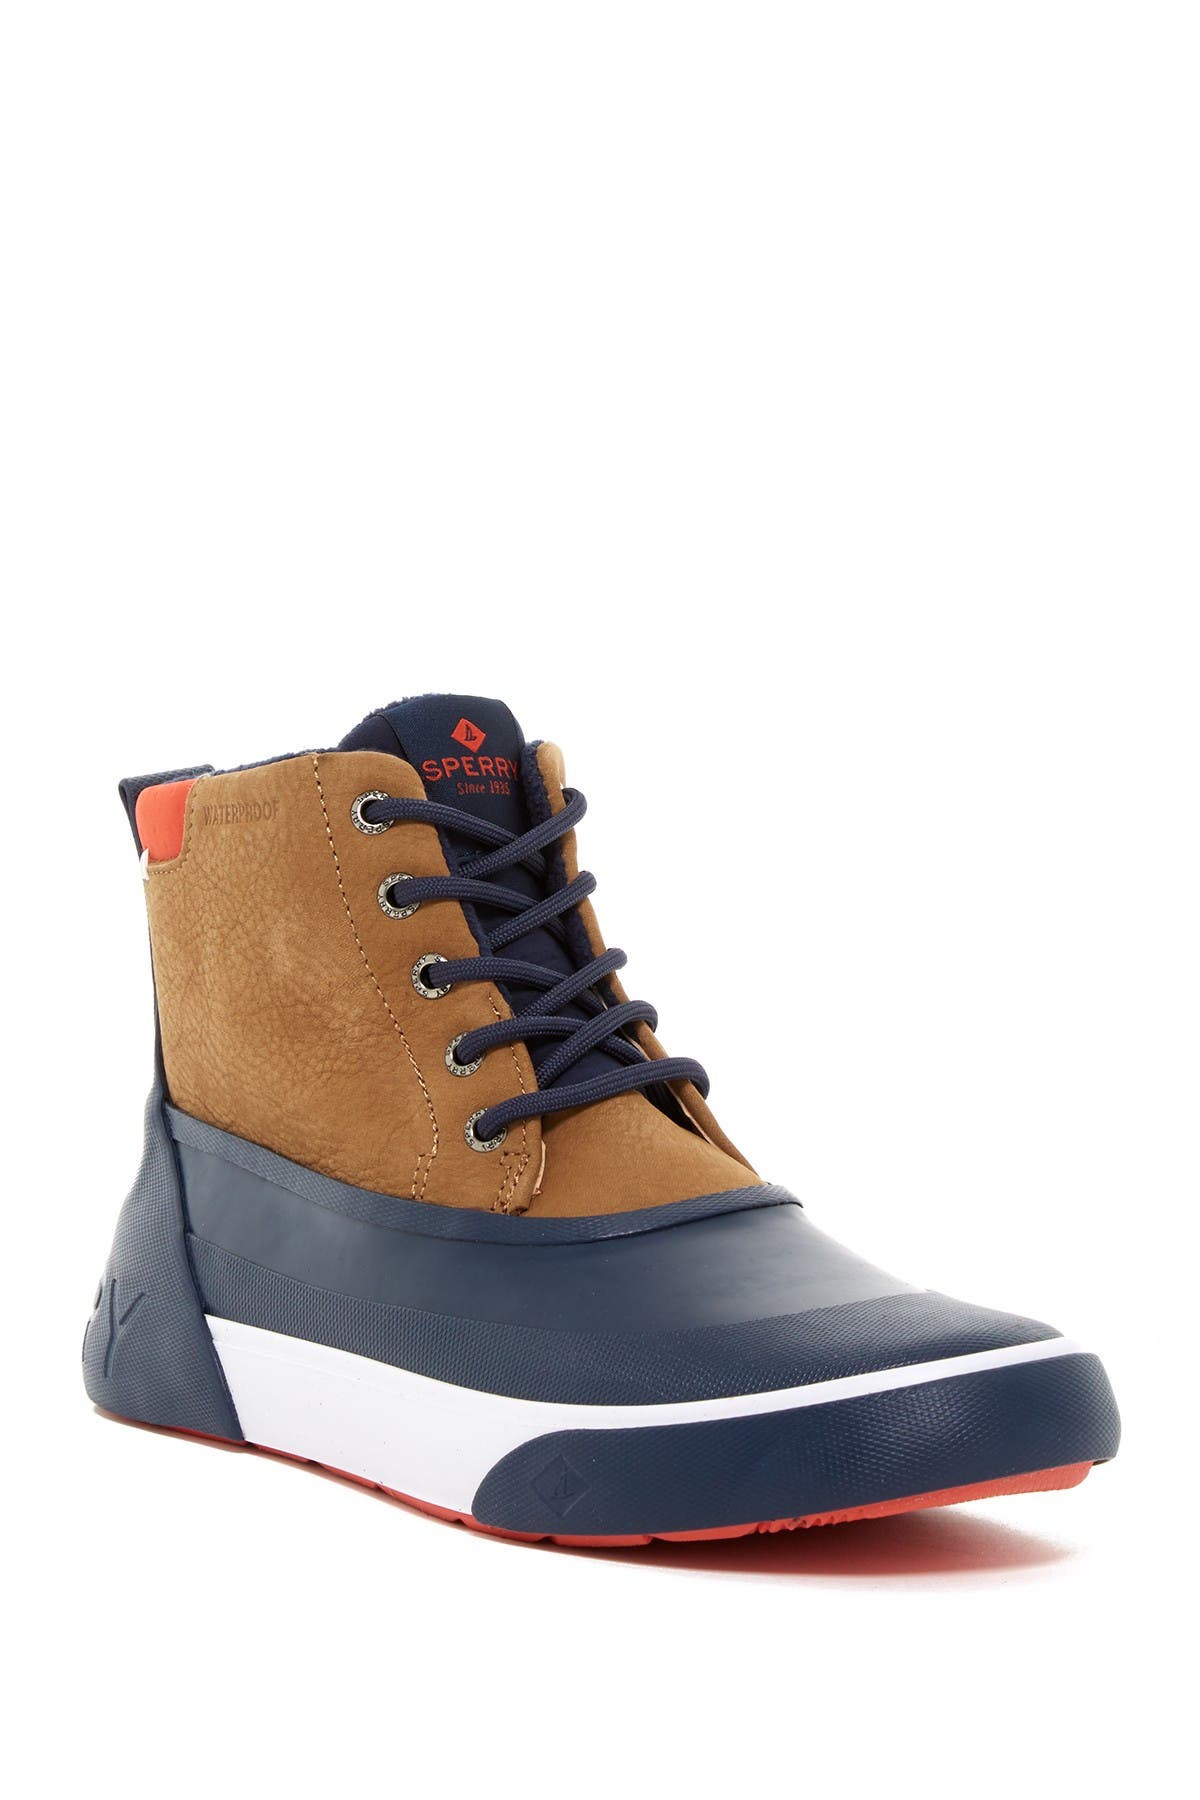 sperry cutwater boot